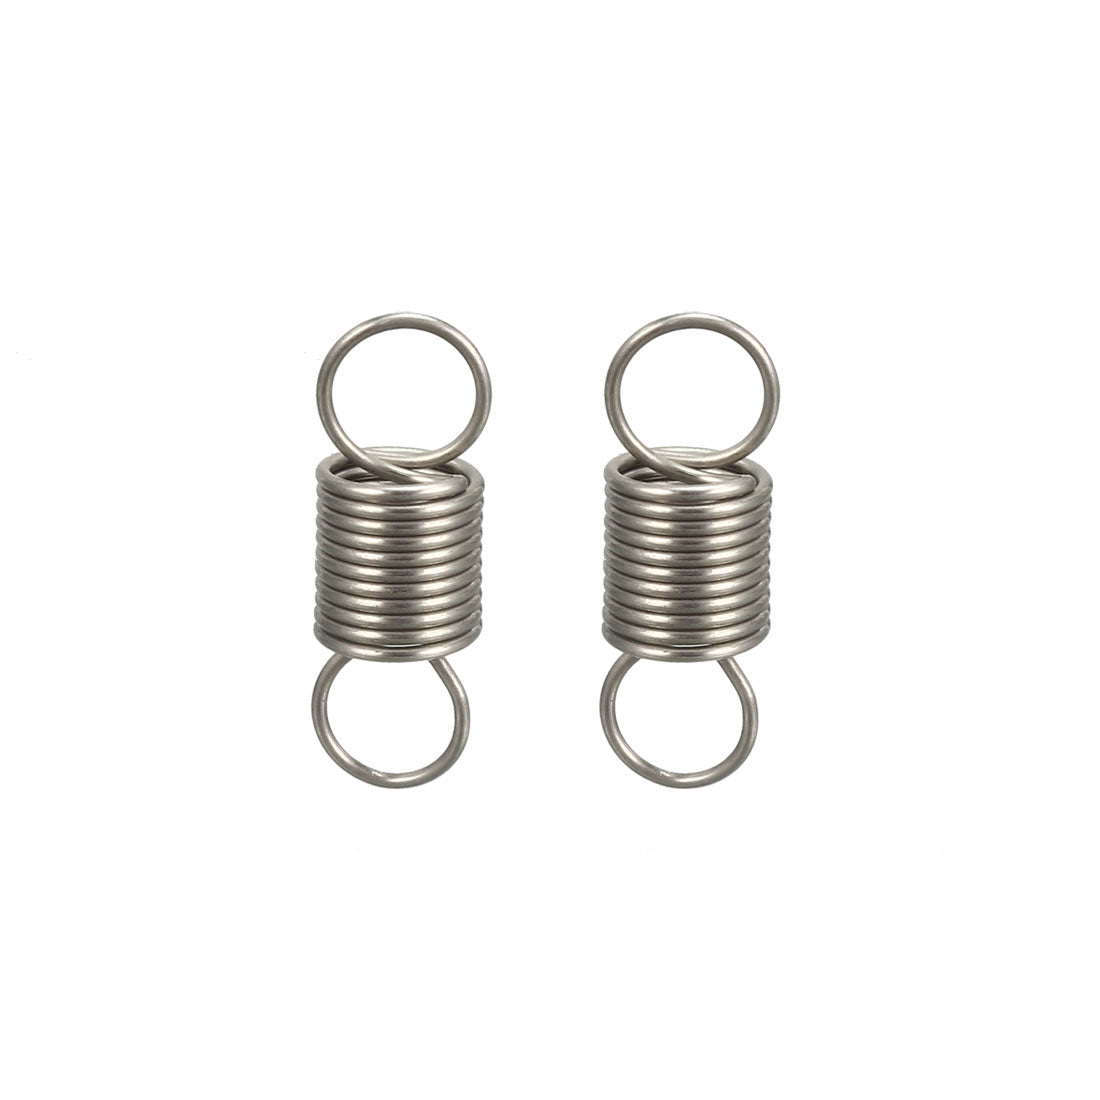 uxcell Uxcell Extended Tension Spring Wire Diameter 0.02", OD 0.2", Free Length 0.59" 2pcs